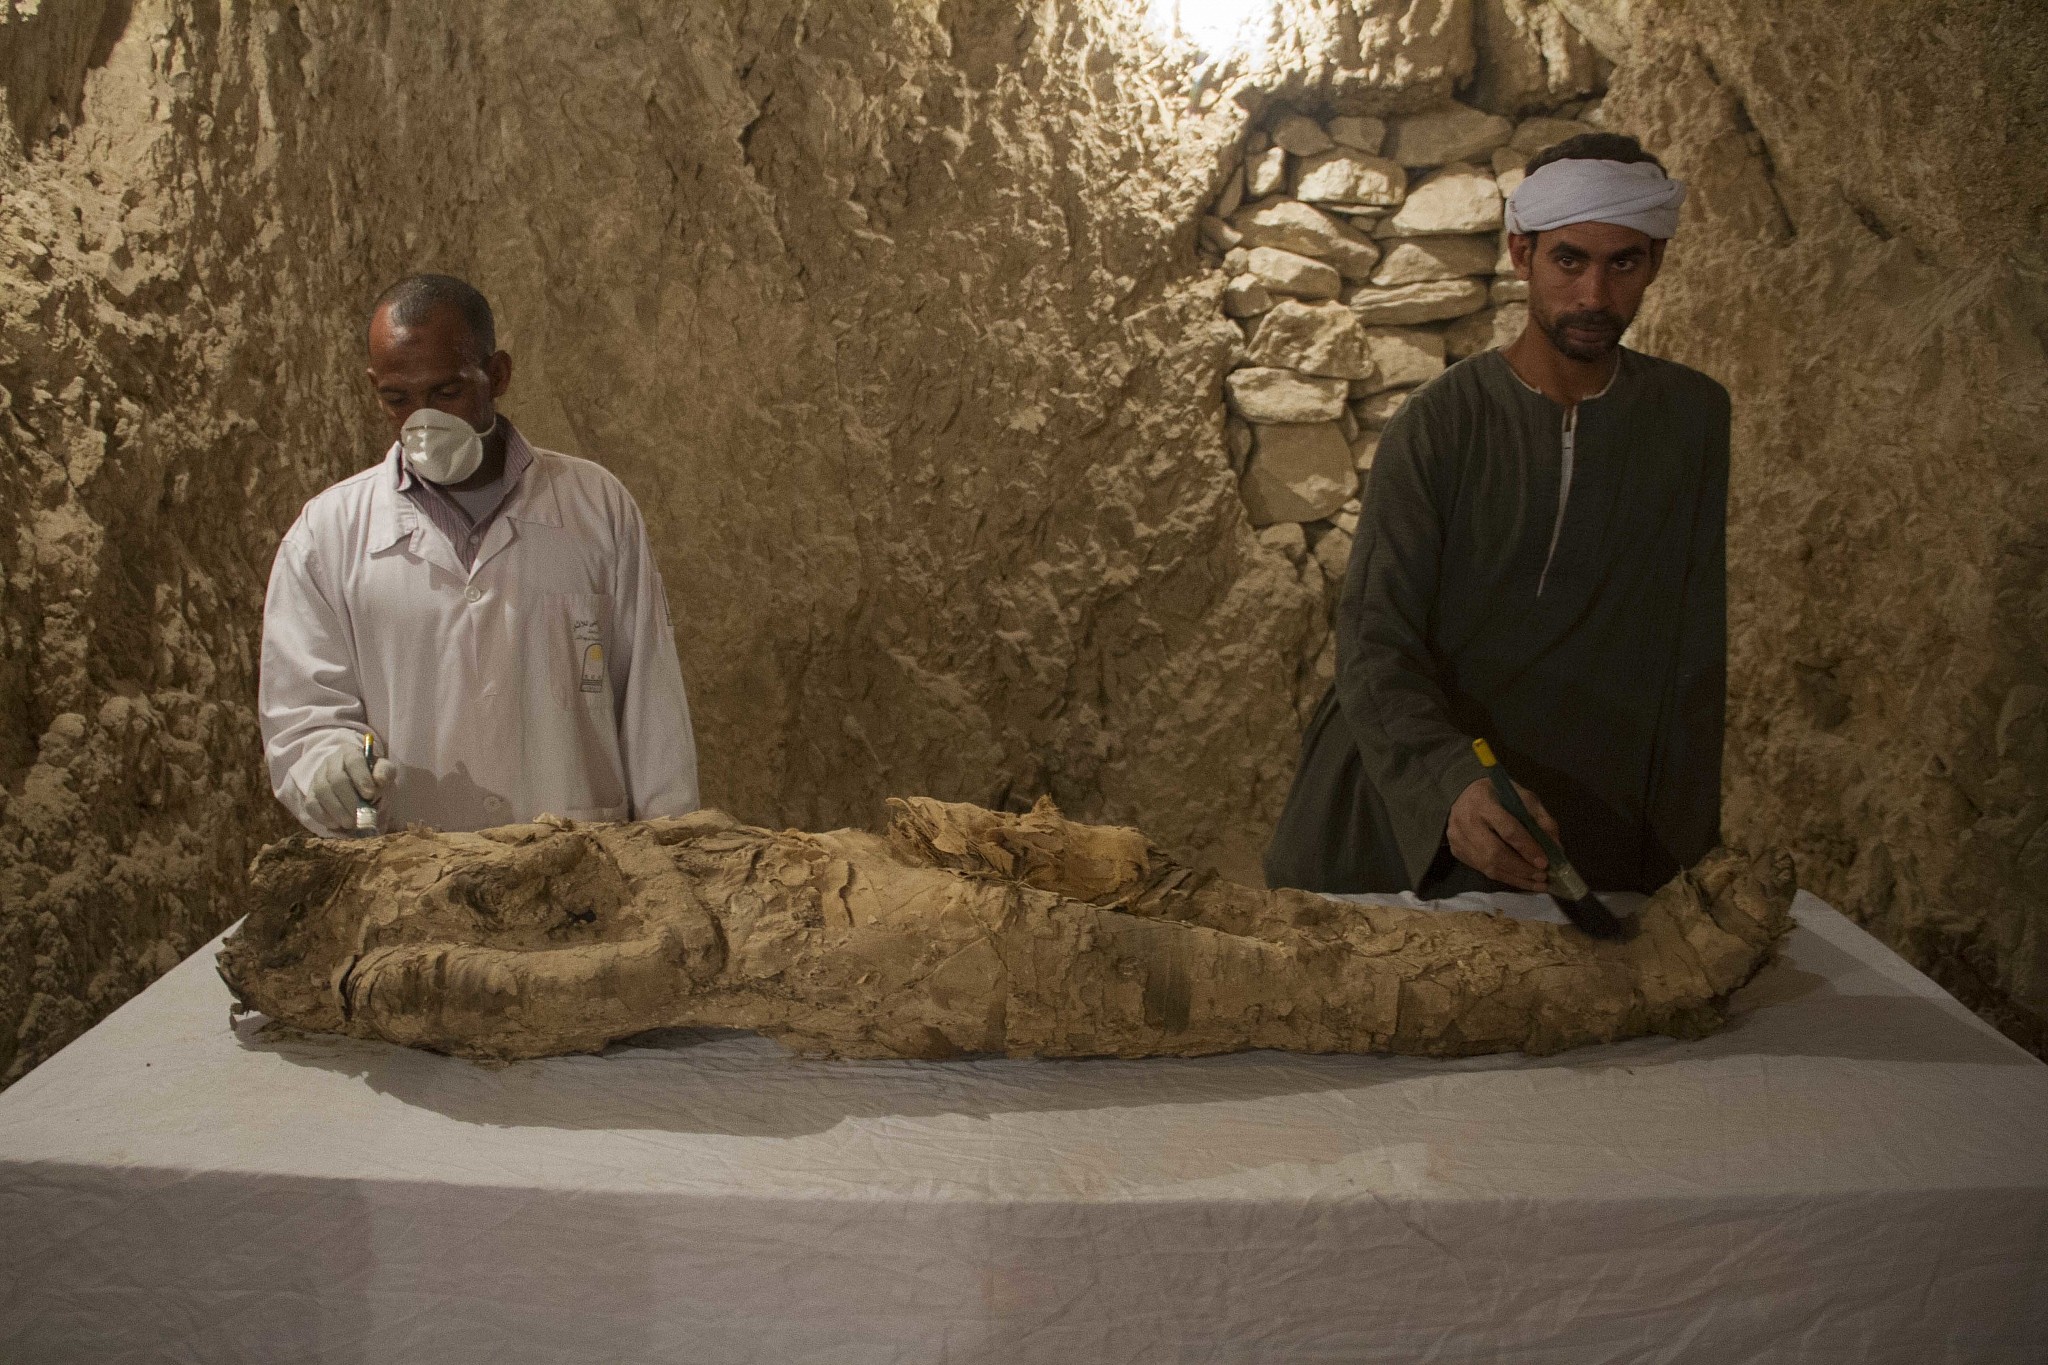 Archaeologists discover 2 ancient tombs in Egypt's Luxor | The Times of Israel